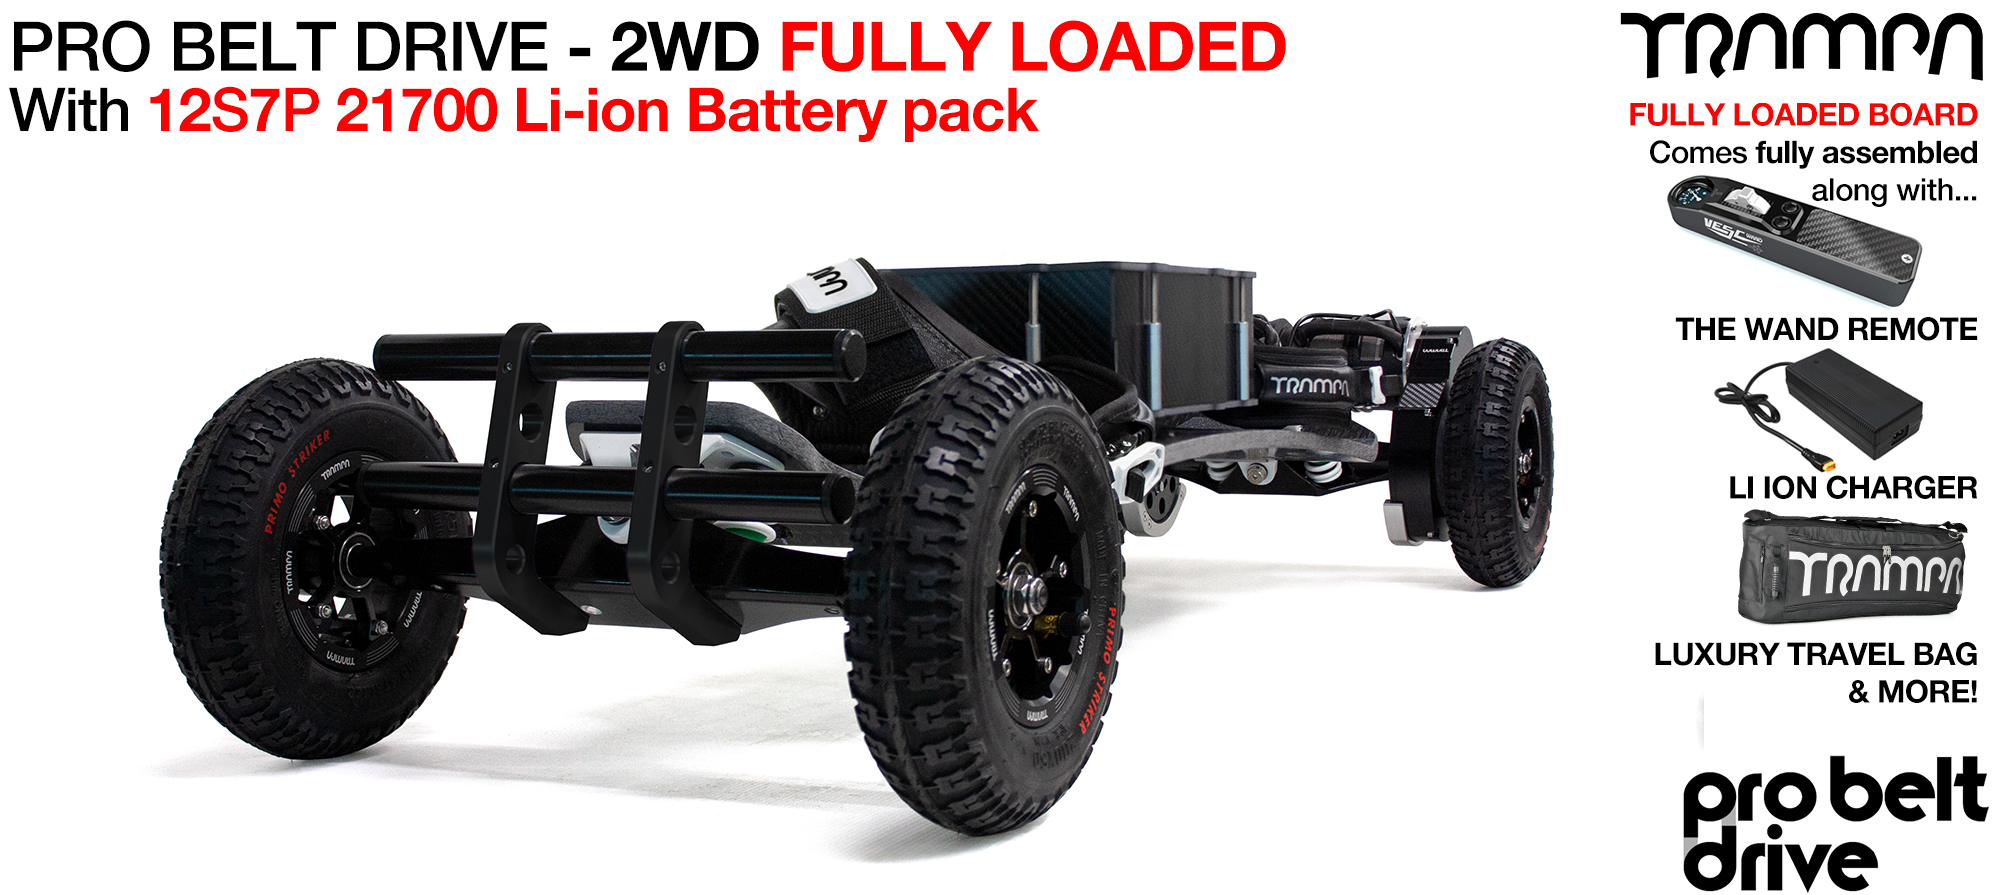 2WD 16mm PRO BELT DRIVE E-MTB - LOADED with 21700 Cell Pack  (£2,100) (out of stock)